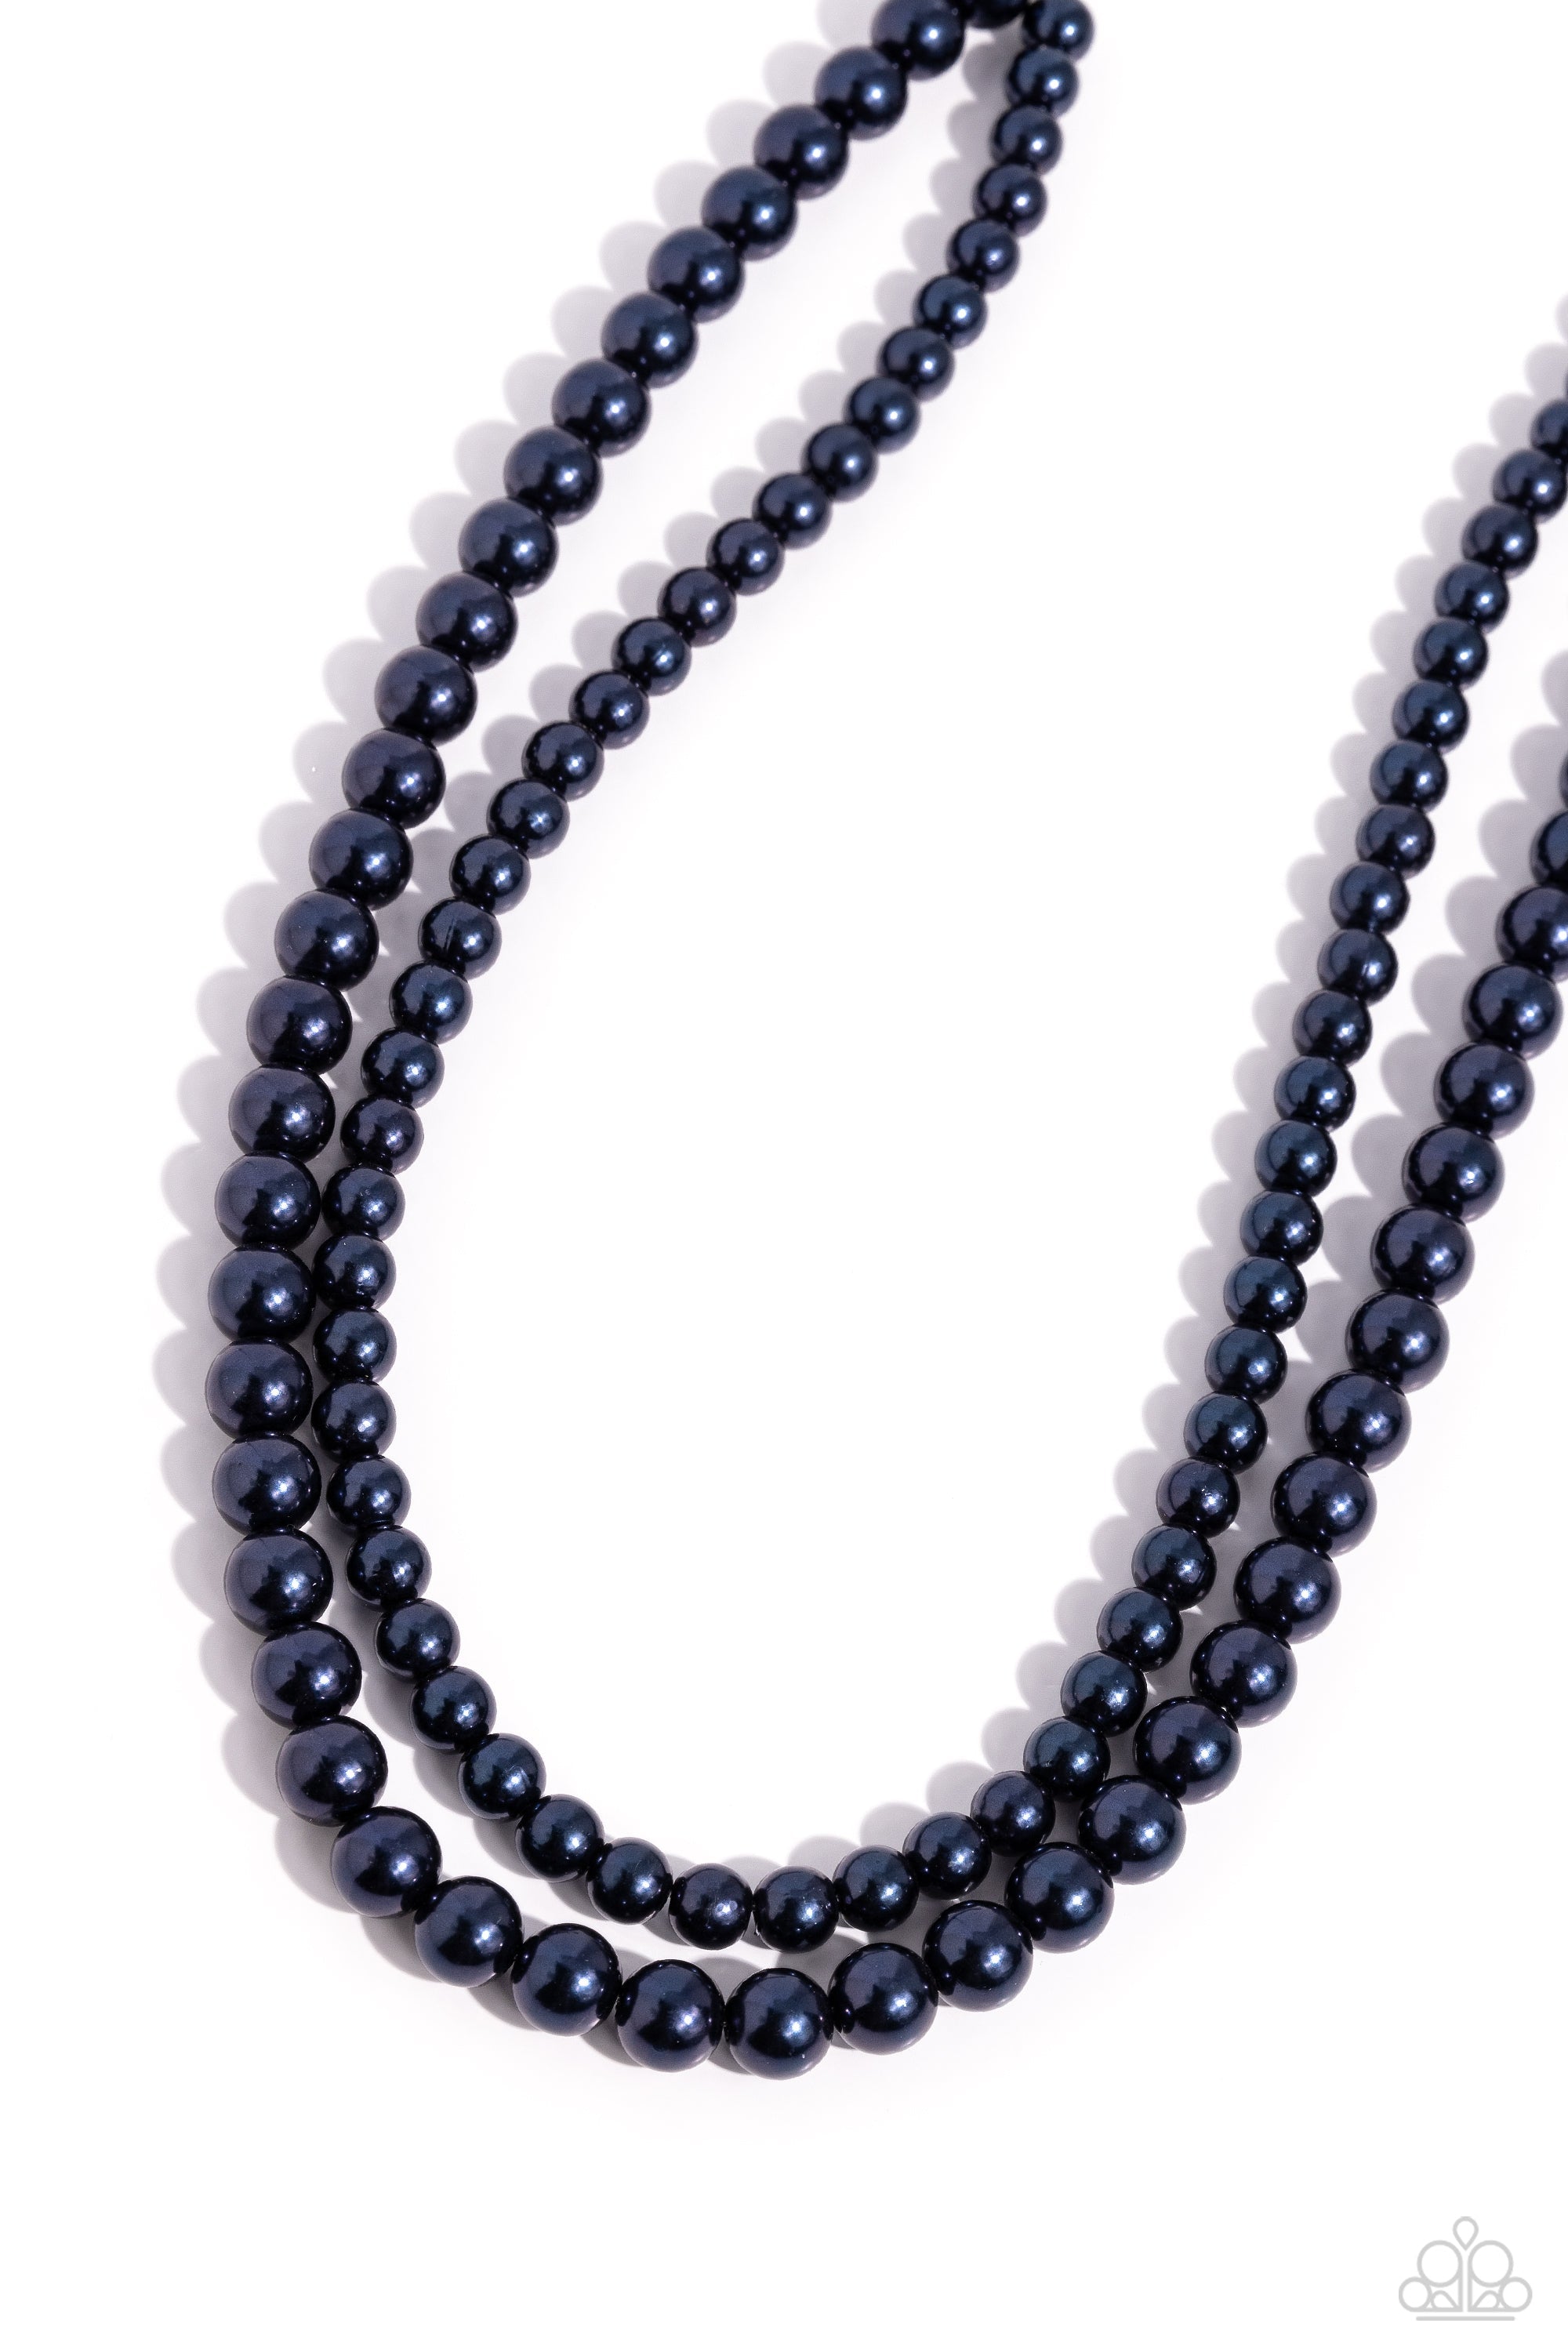 Woman Of The Century Blue Pearl Necklace - Paparazzi Accessories- lightbox - CarasShop.com - $5 Jewelry by Cara Jewels